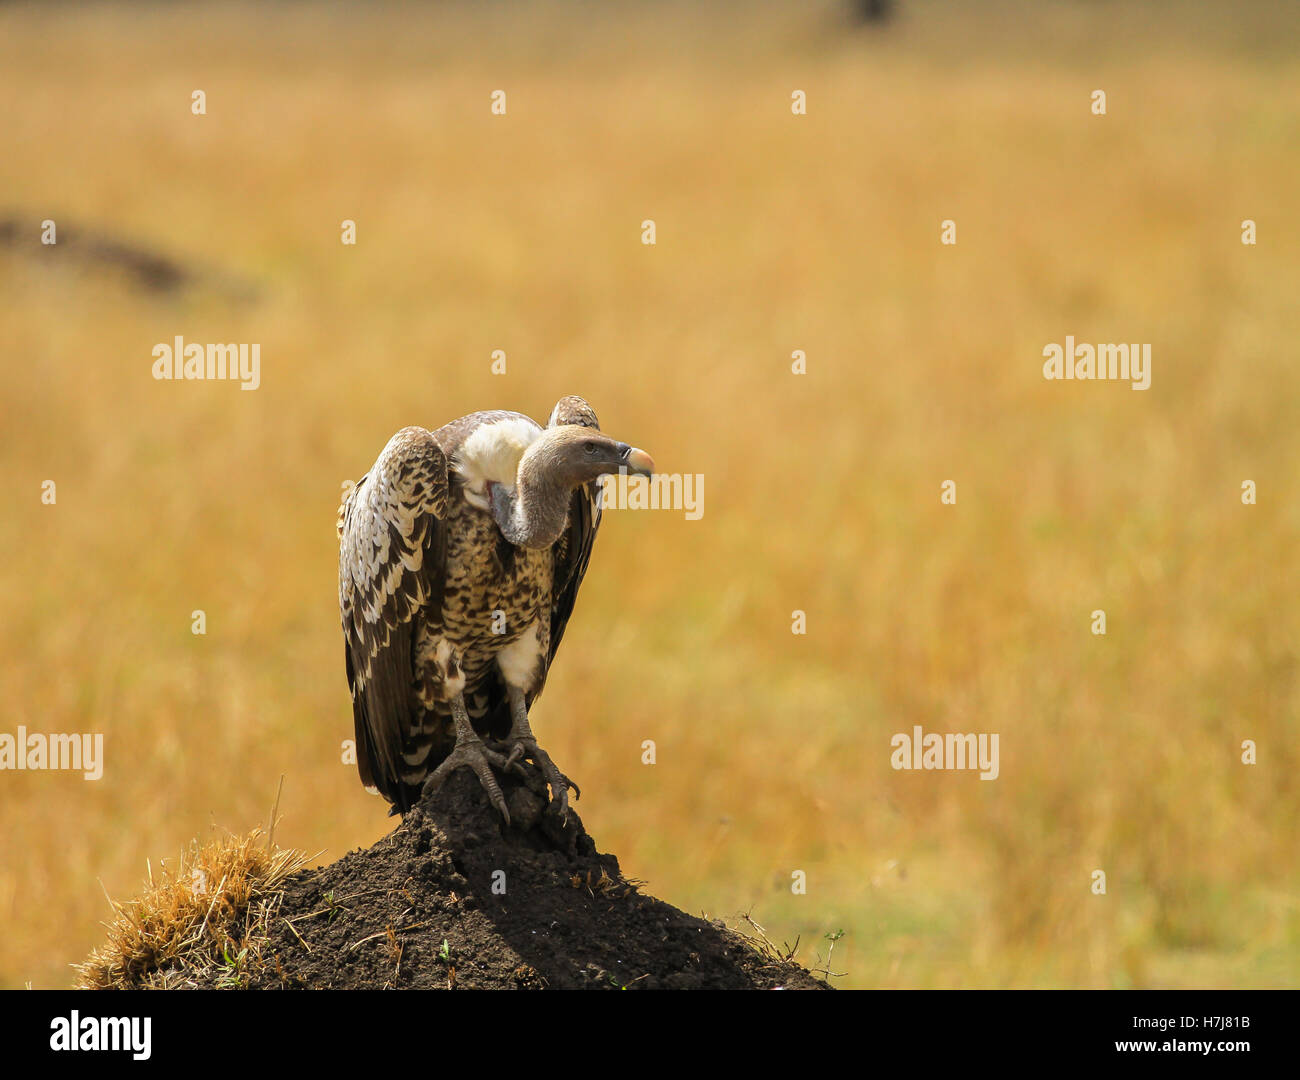 Vulture in nature wildlife kenya. vultures are found in Europe, Africa, and Asia. Stock Photo